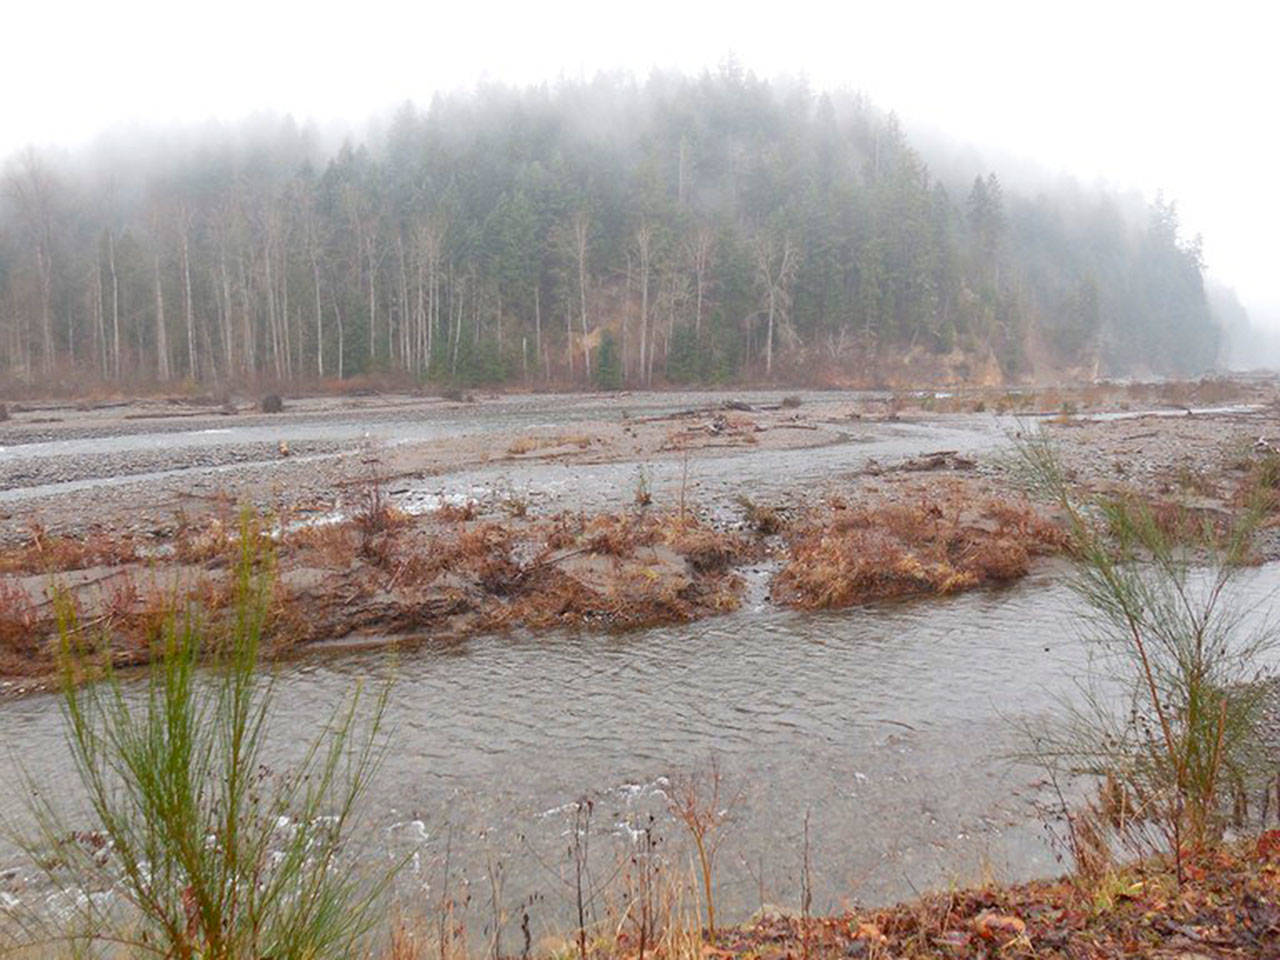 The Carbon River’s migration has eroded the Charles Crocker Levee alongside the Foothills Trail. Photo courtesy Washington Trails Association / https://www.wta.org/go-hiking/hikes/foothills-trail